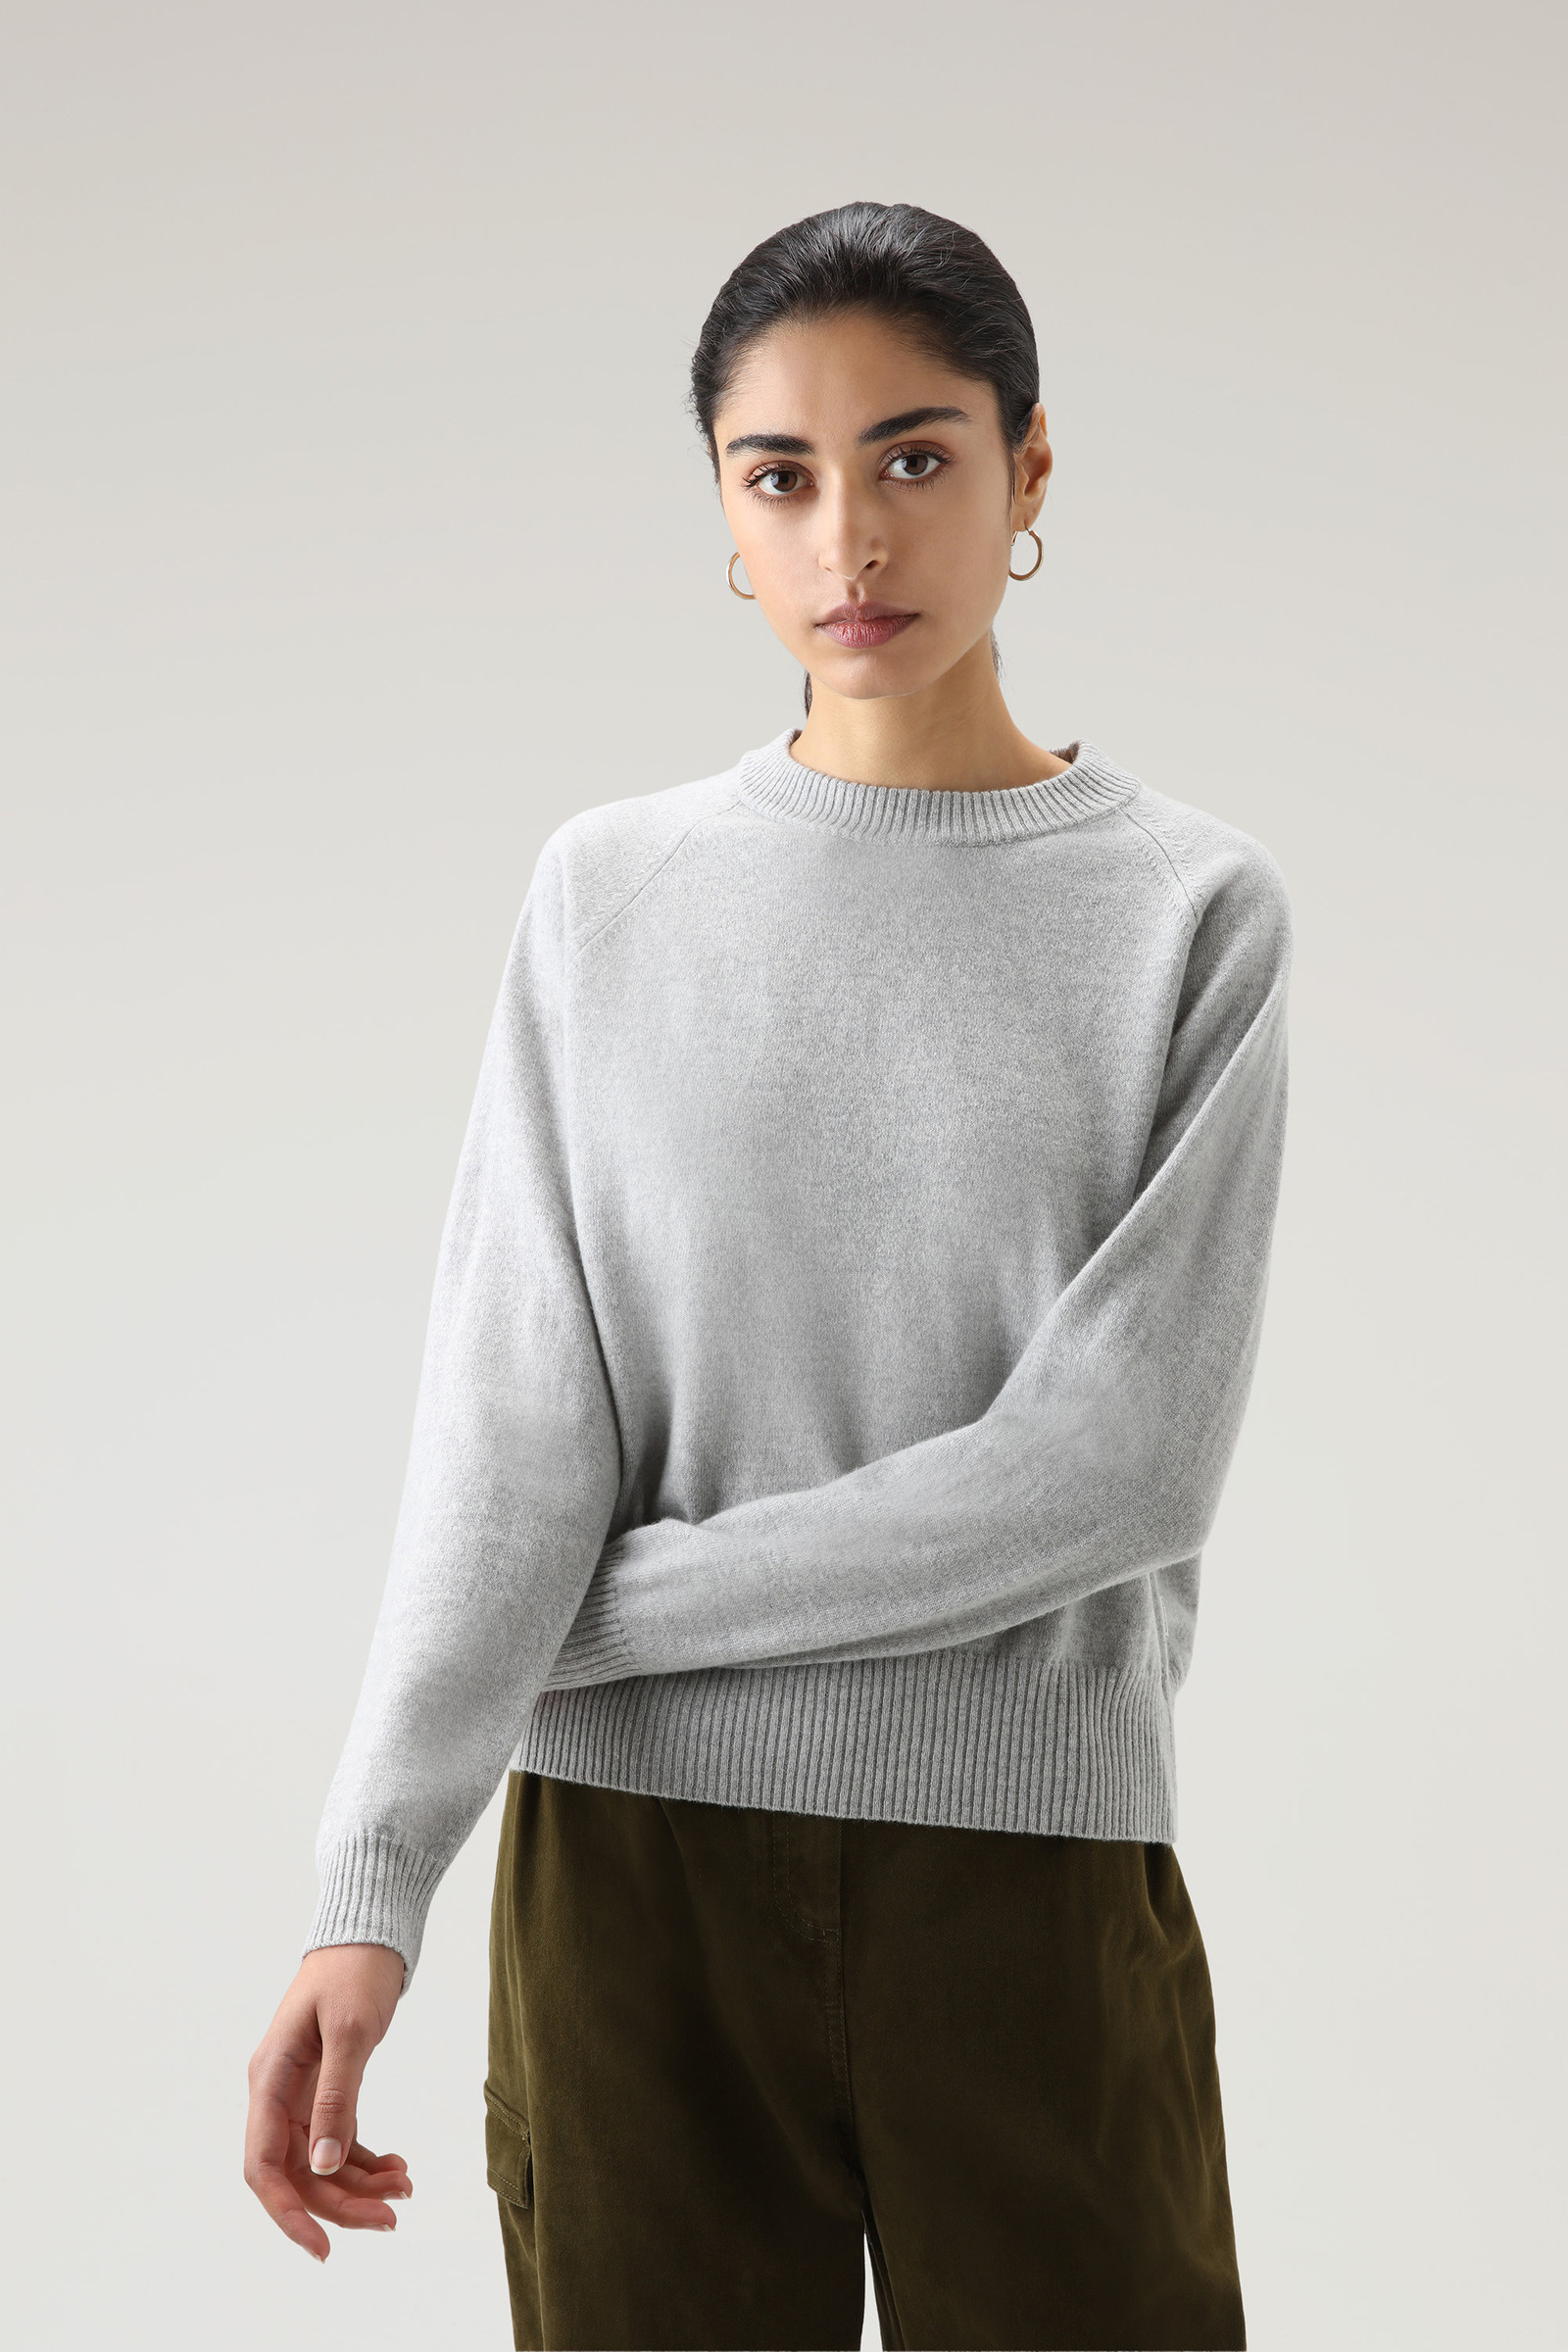 Cashmere and Wool Blend Crewneck Sweater - Women - Grey